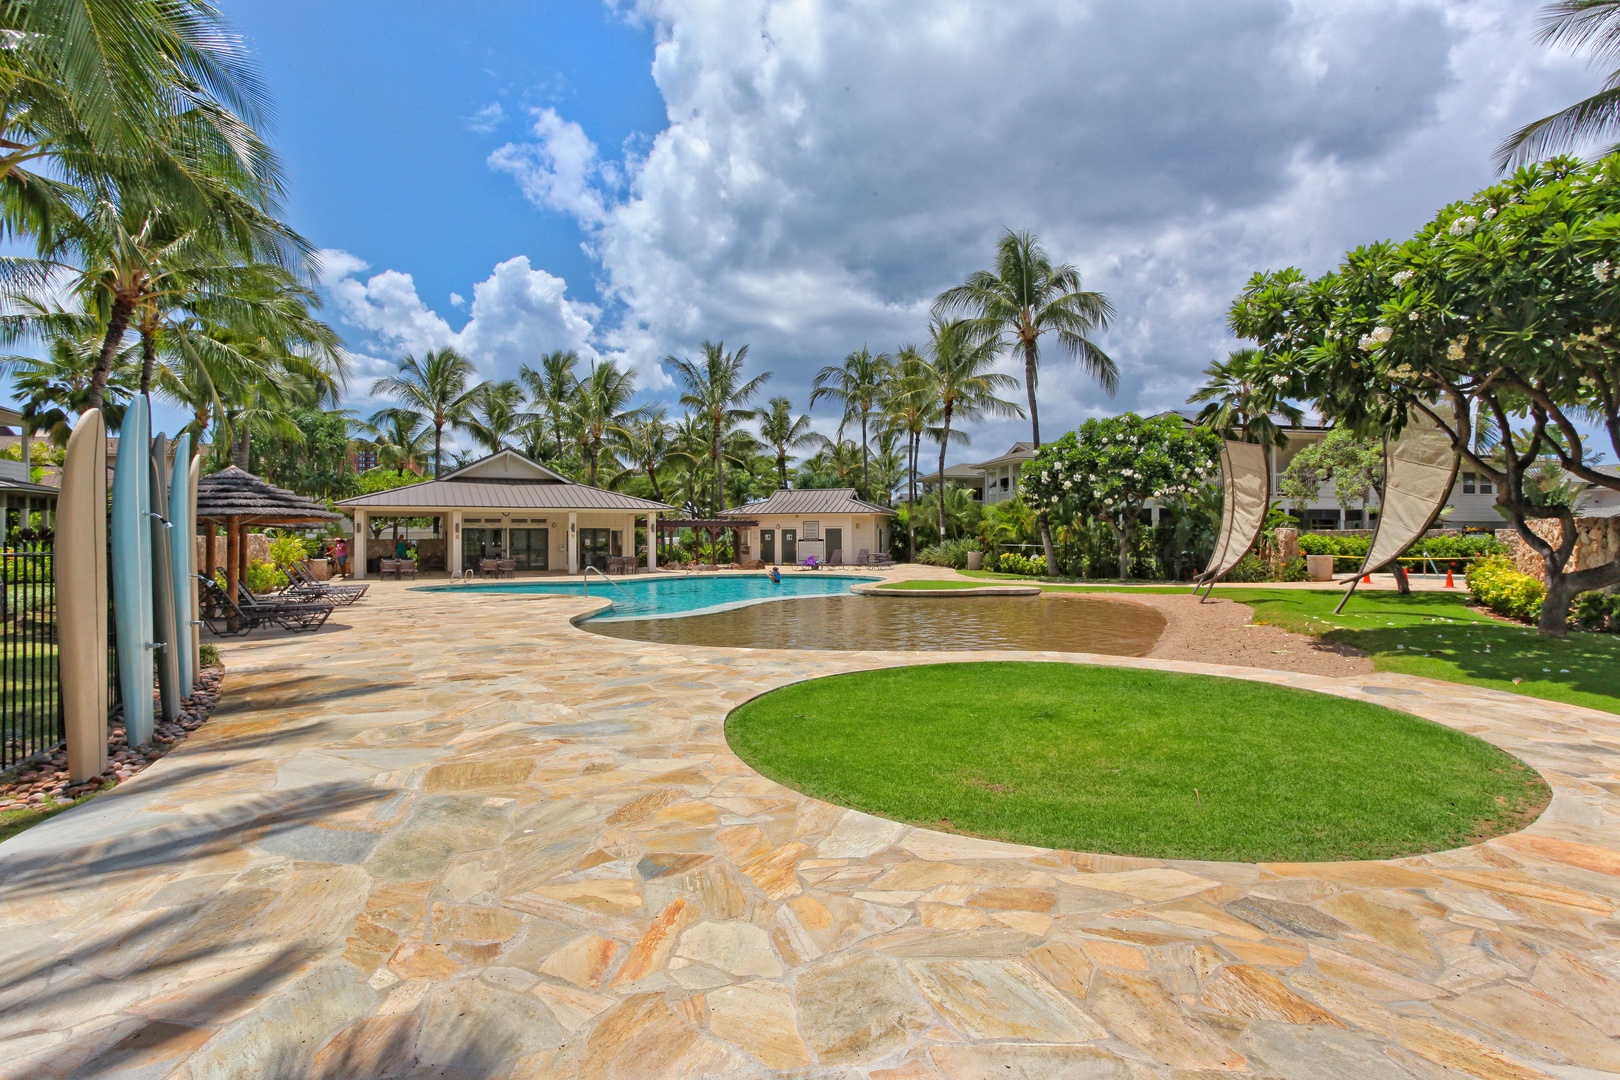 Kapolei Vacation Rentals, Coconut Plantation 1208-2 - This pool also includes a sand bottom pool area under swaying palm trees.